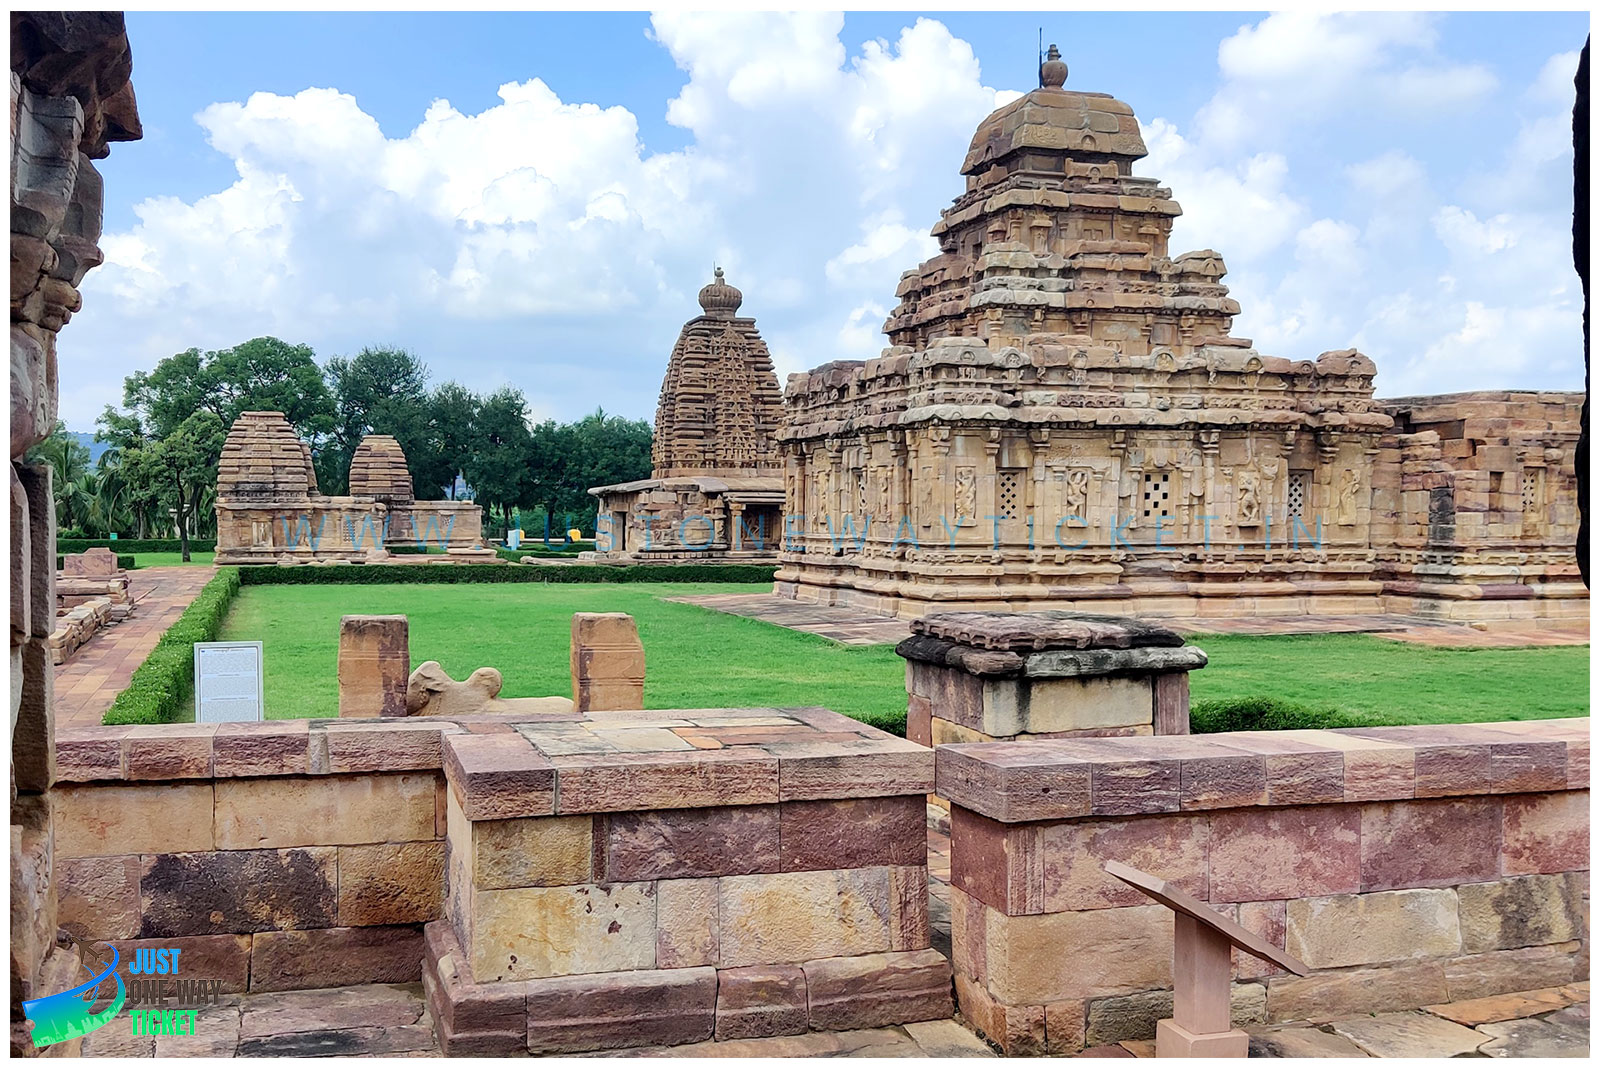 Incredible Temple Architecture at Pattadakal